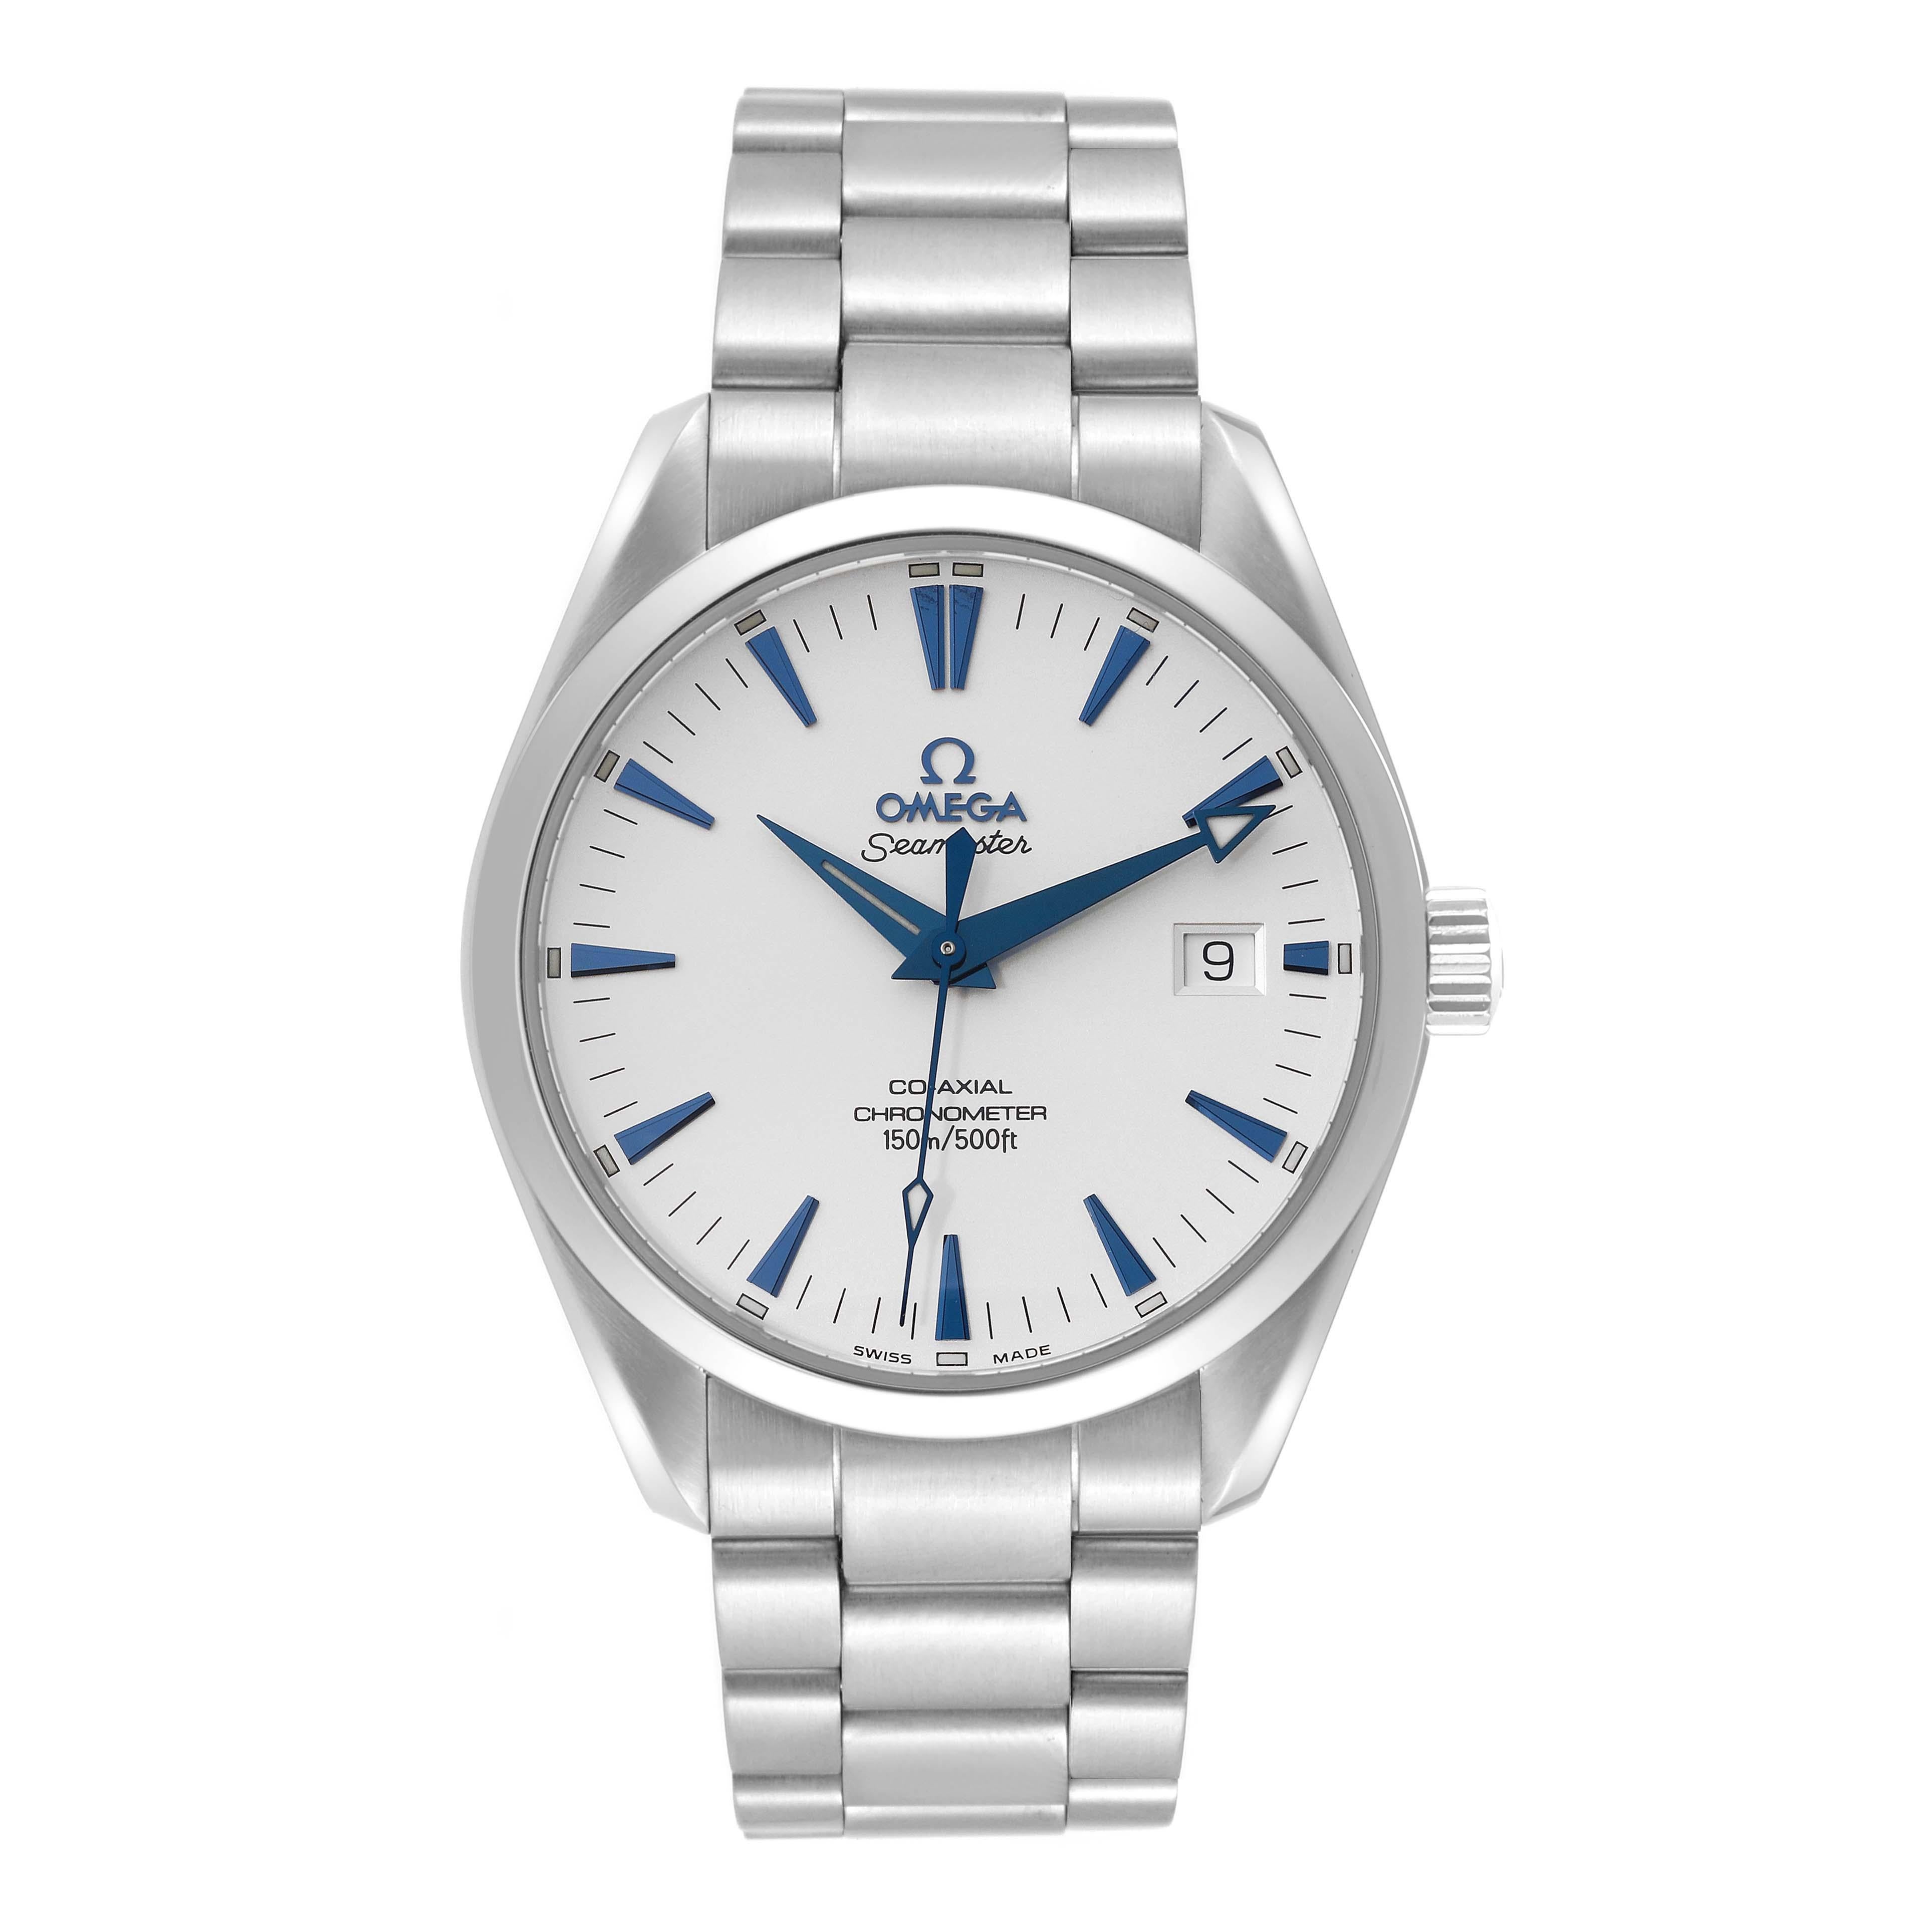 Omega Seamaster Aqua Terra Blue Hands Steel Mens Watch 2502.33.00. Automatic self-winding movement. Stainless steel round case 42.2 mm in diameter. Transparent exhibition sapphire crystal caseback. Stainless steel smooth bezel. Scratch resistant